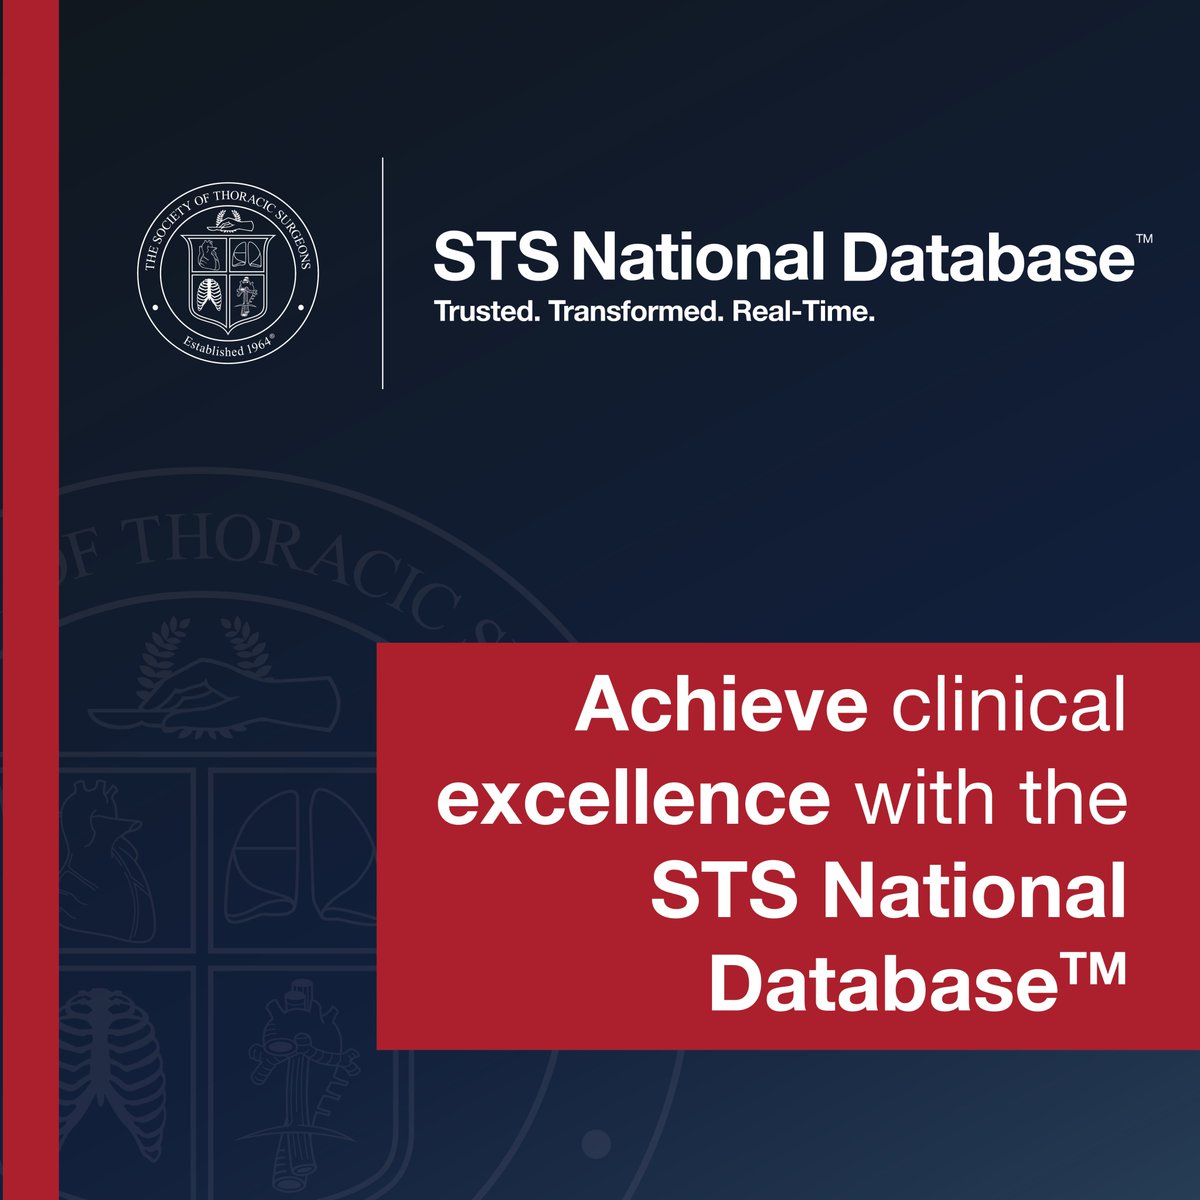 Experience the STS difference: 10 million procedures, real-time data, accurate risk models, and game-changing insights to achieve high-quality, long-term patient outcomes. Attending #AATS2024? Stop by booth 325 during exhibit hours to learn more about the STS National Database.